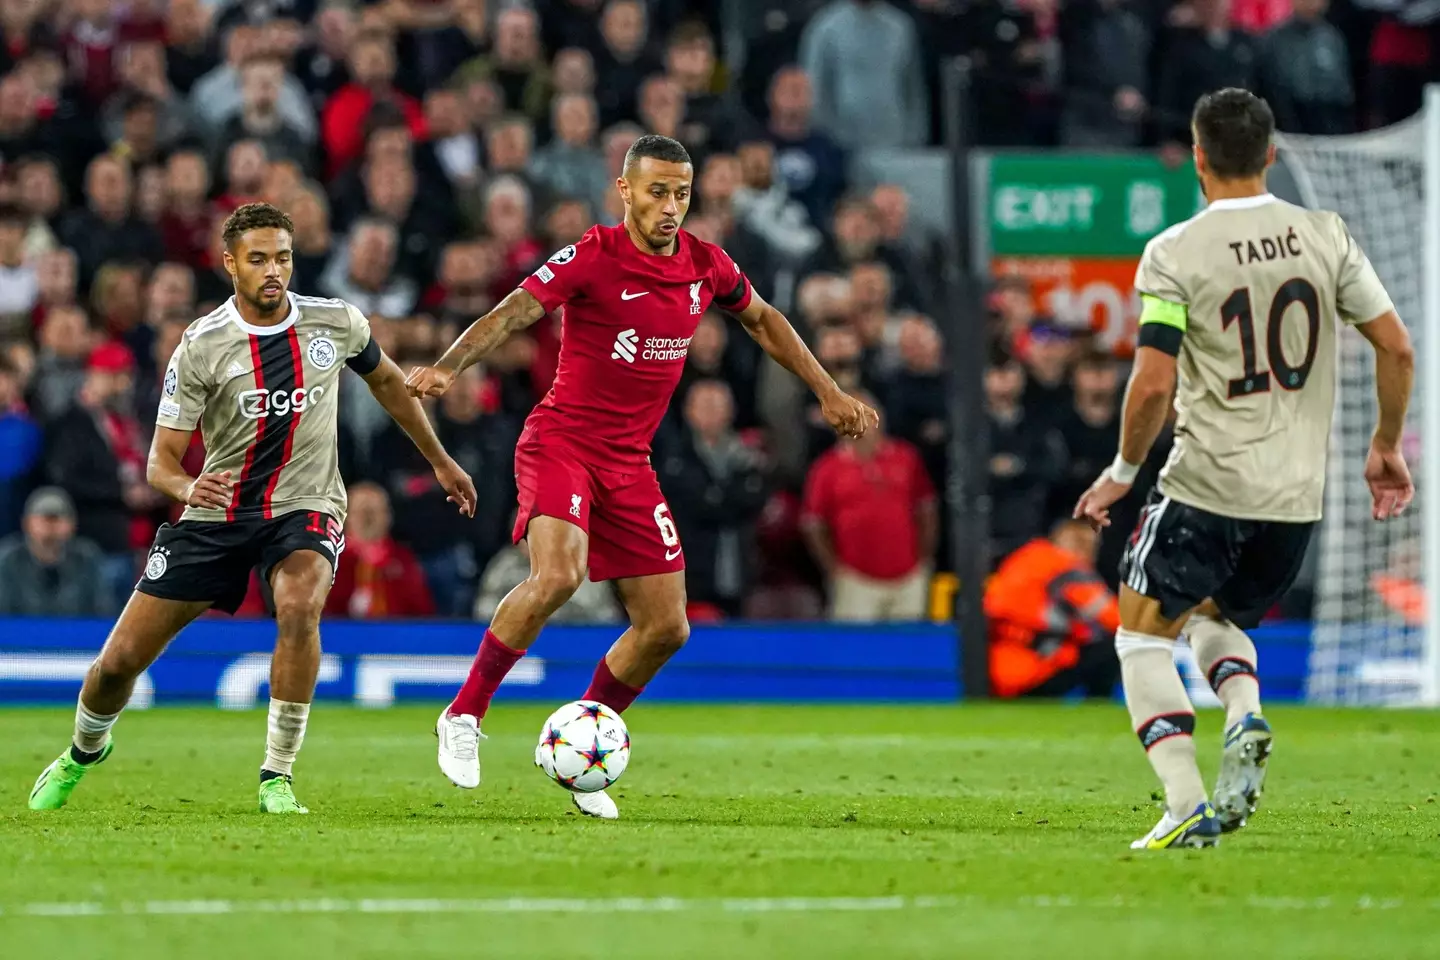 Thiago in action against Ajax in the Champions League. (Image